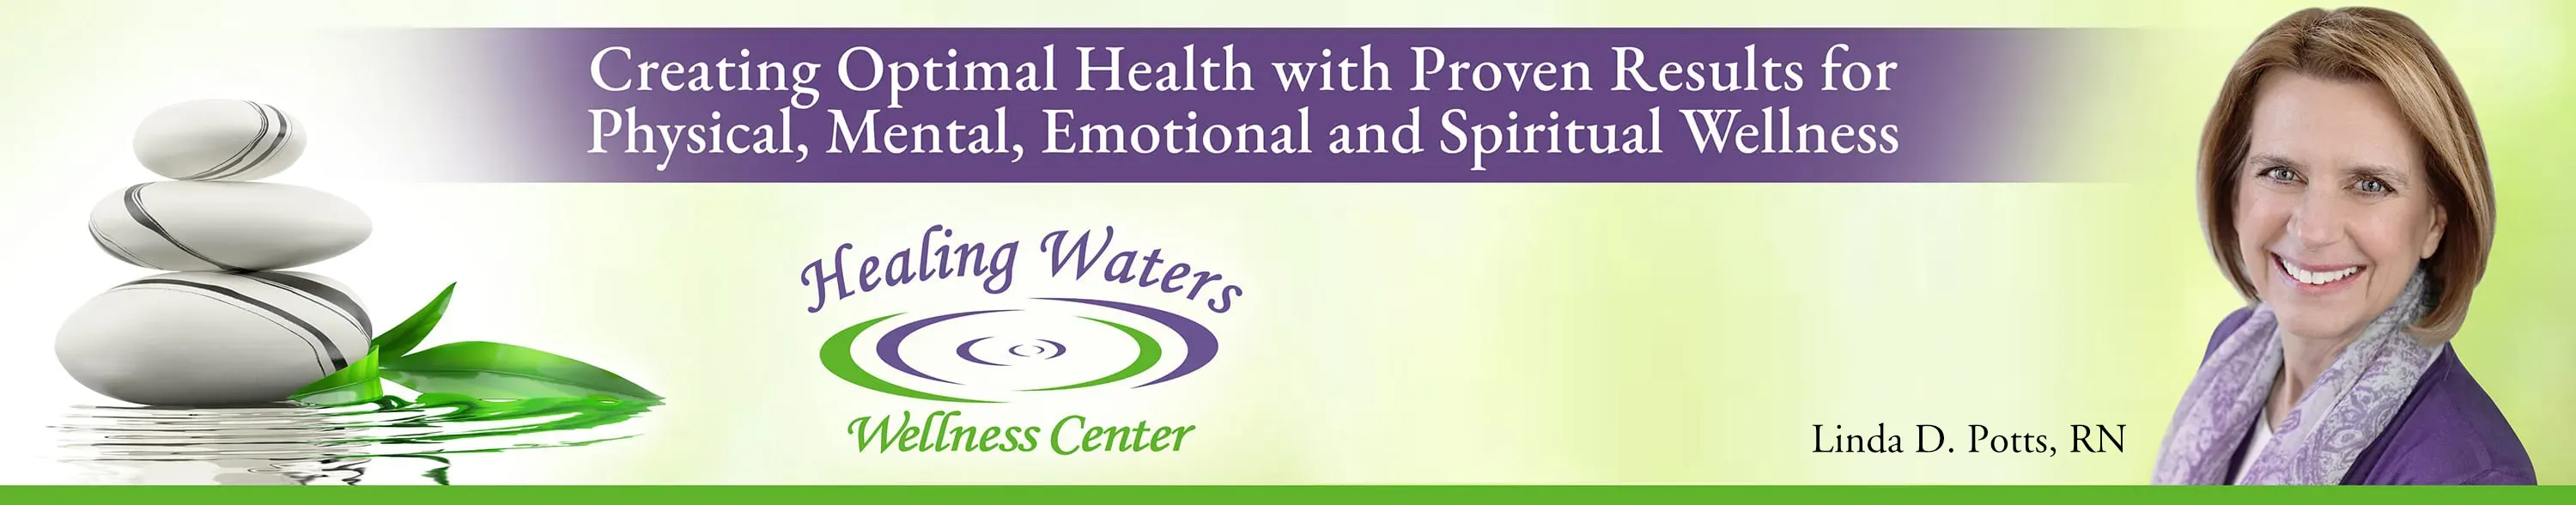 banner for Healing Waters Wellness Center with photo of Linda D. Potts, RN